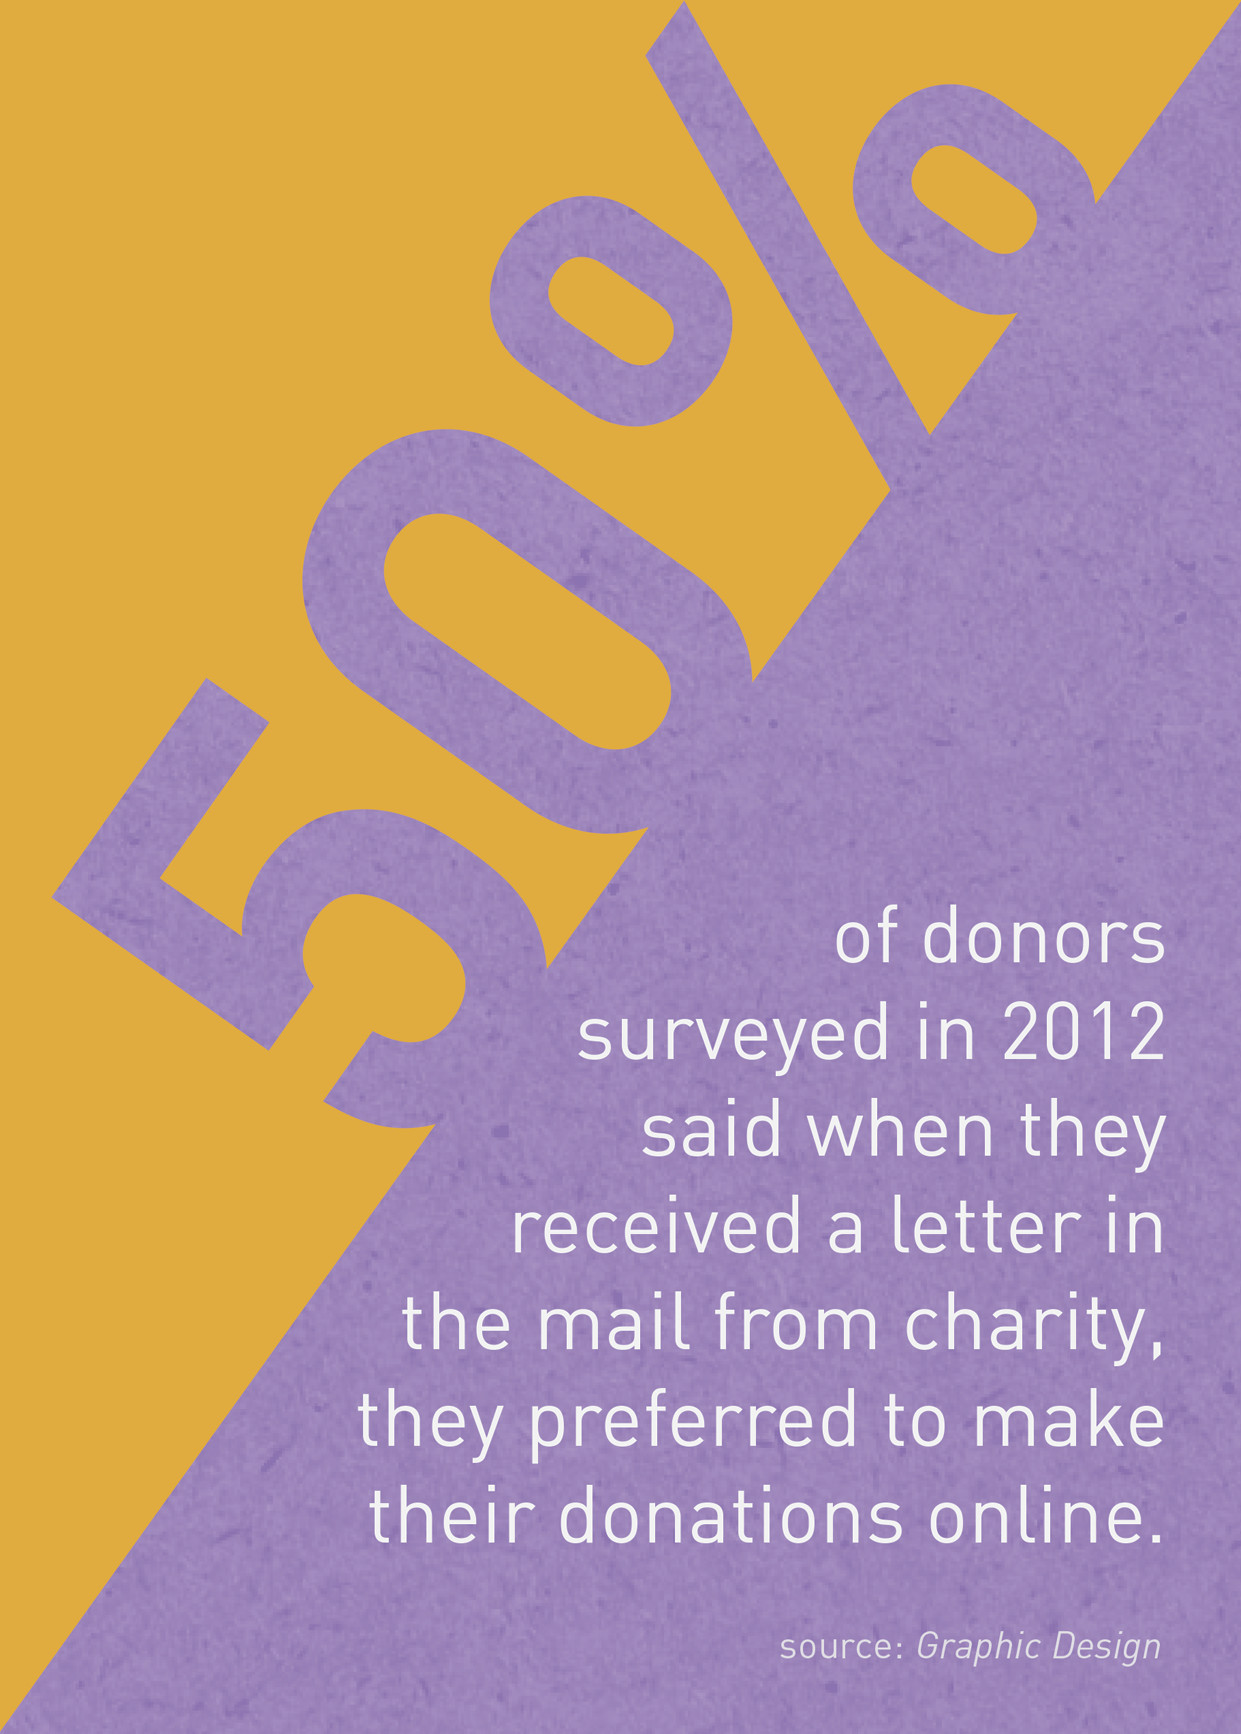 infographic about donor preferences